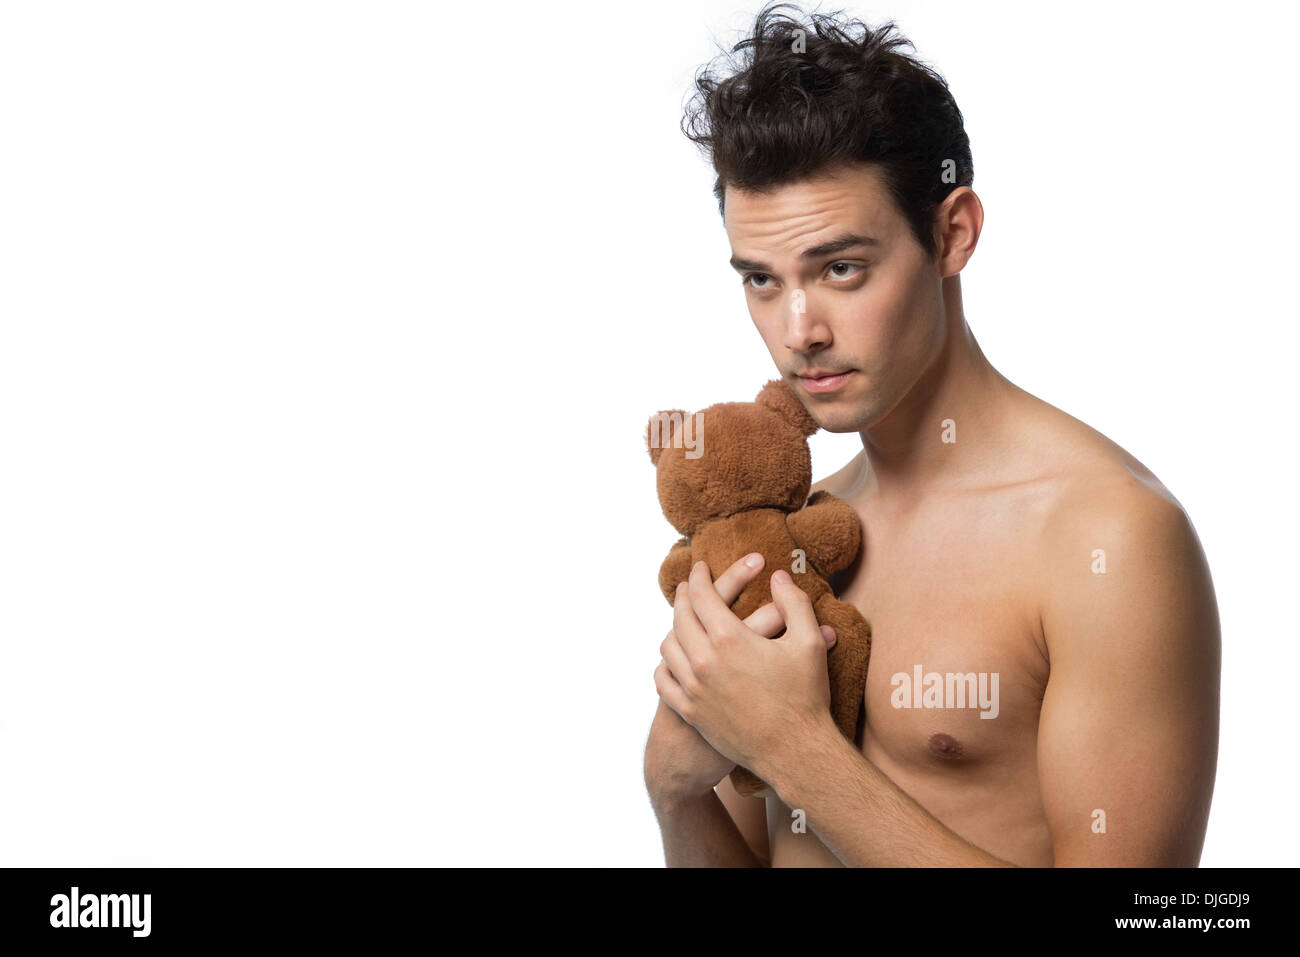 A dark hair handsome man, male model, bare chested, young at heart, hugging a brown teddy bear innocently, looking away happy. Stock Photo